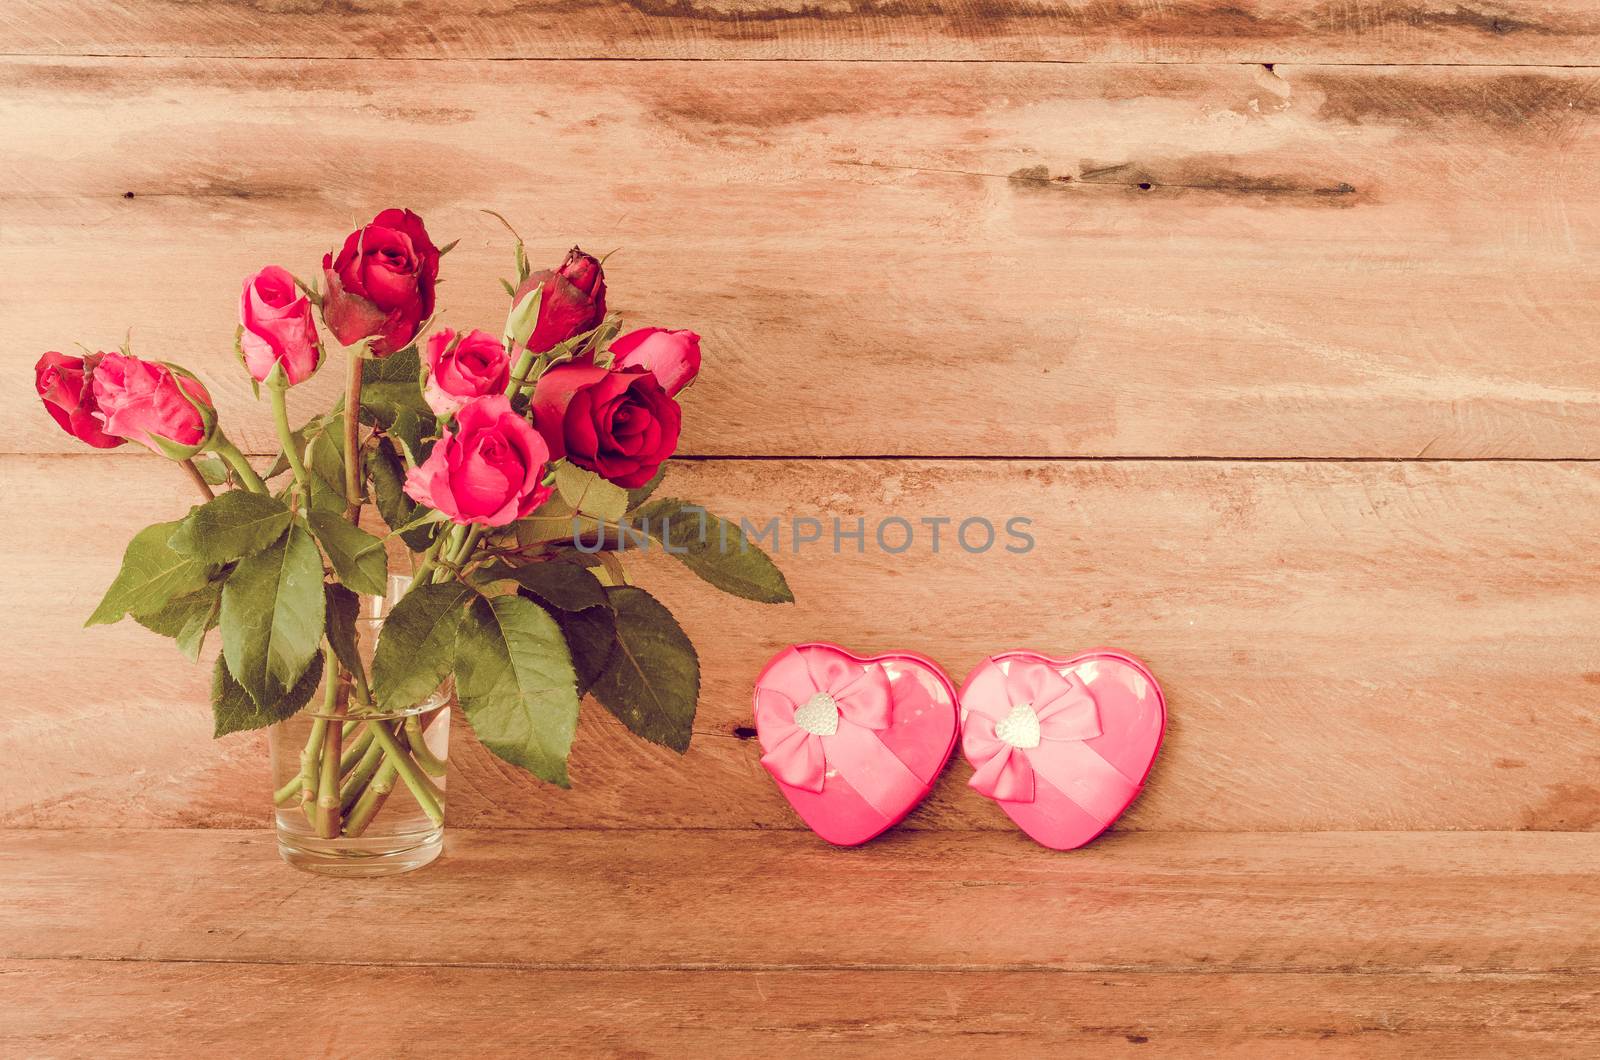 Red roses in glass and Heart shaped Valentine's Day gift box on wooden background.